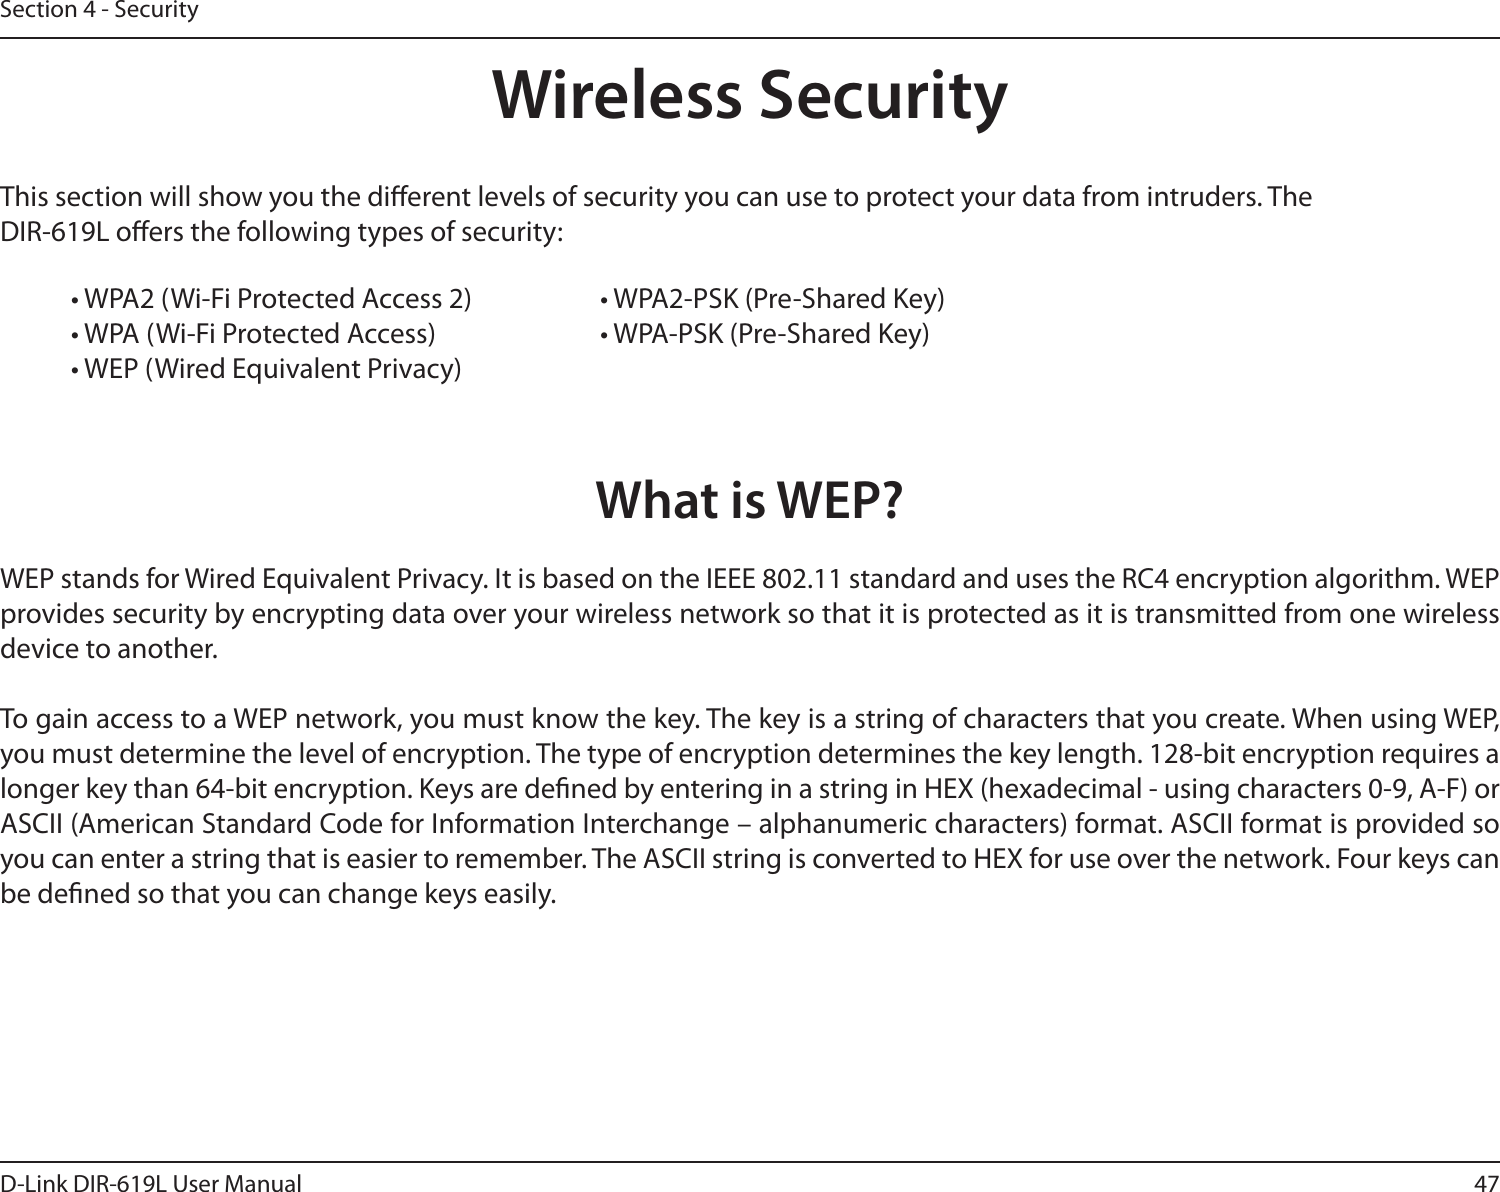 47D-Link DIR-619L User ManualSection 4 - SecurityWireless SecurityThis section will show you the dierent levels of security you can use to protect your data from intruders. The DIR-619L oers the following types of security:• WPA2 (Wi-Fi Protected Access 2)     • WPA2-PSK (Pre-Shared Key)• WPA (Wi-Fi Protected Access)      • WPA-PSK (Pre-Shared Key)• WEP (Wired Equivalent Privacy)What is WEP?WEP stands for Wired Equivalent Privacy. It is based on the IEEE 802.11 standard and uses the RC4 encryption algorithm. WEP provides security by encrypting data over your wireless network so that it is protected as it is transmitted from one wireless device to another.To gain access to a WEP network, you must know the key. The key is a string of characters that you create. When using WEP, you must determine the level of encryption. The type of encryption determines the key length. 128-bit encryption requires a longer key than 64-bit encryption. Keys are dened by entering in a string in HEX (hexadecimal - using characters 0-9, A-F) or ASCII (American Standard Code for Information Interchange – alphanumeric characters) format. ASCII format is provided so you can enter a string that is easier to remember. The ASCII string is converted to HEX for use over the network. Four keys can be dened so that you can change keys easily.